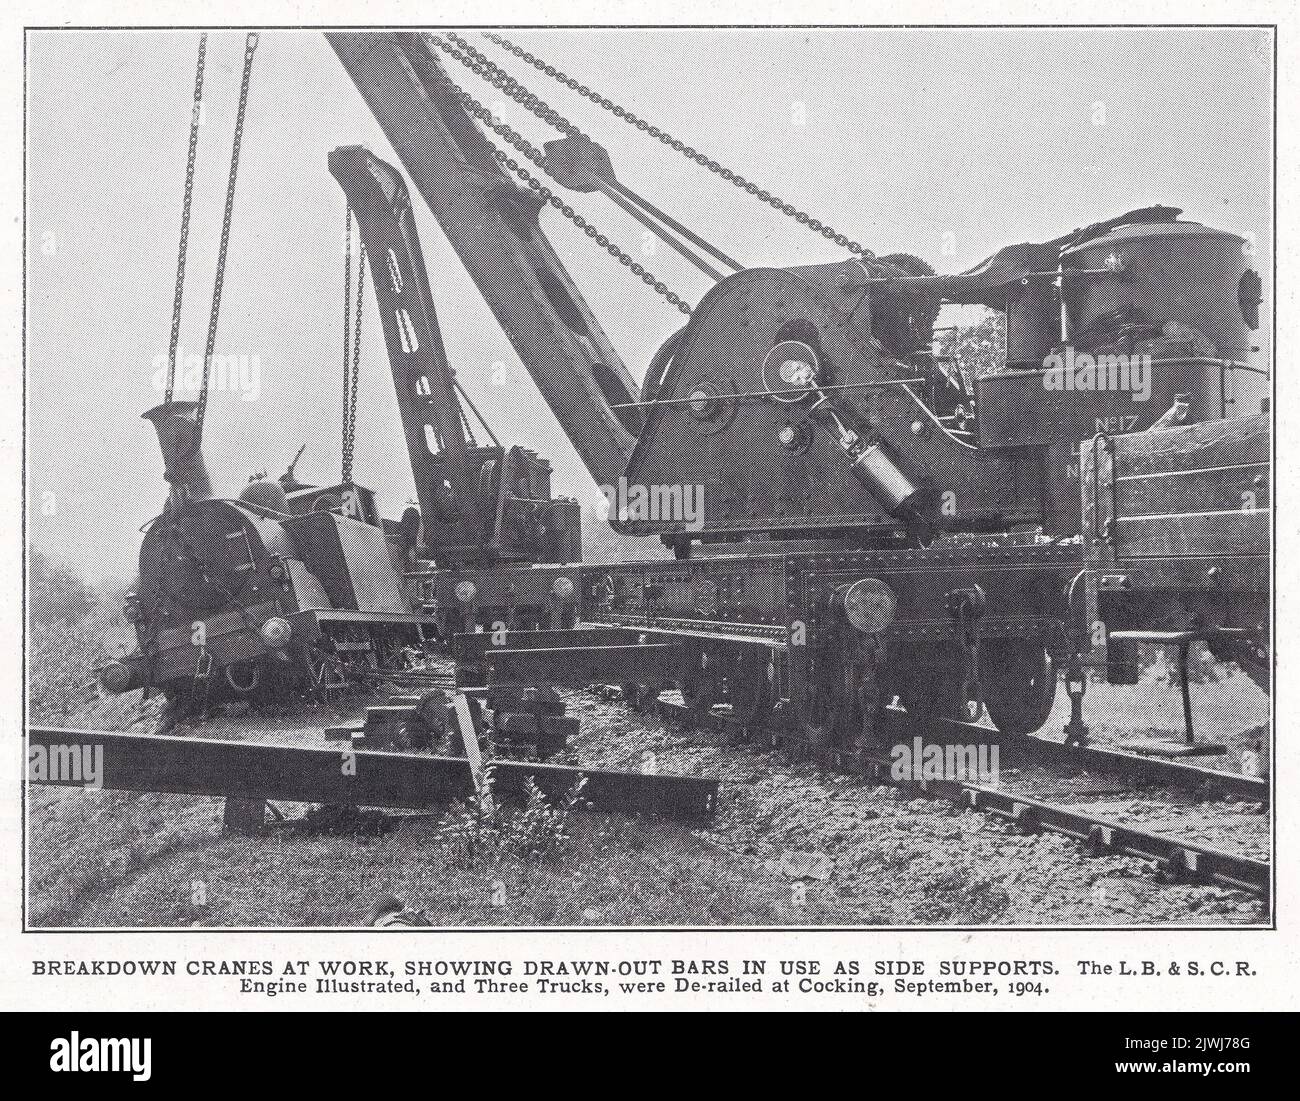 The L. B. & S. C. R. engine and trucks derailed at Cocking 1904.  Breakdown cranes at work showing drawn out bars in use as side supports. Stock Photo